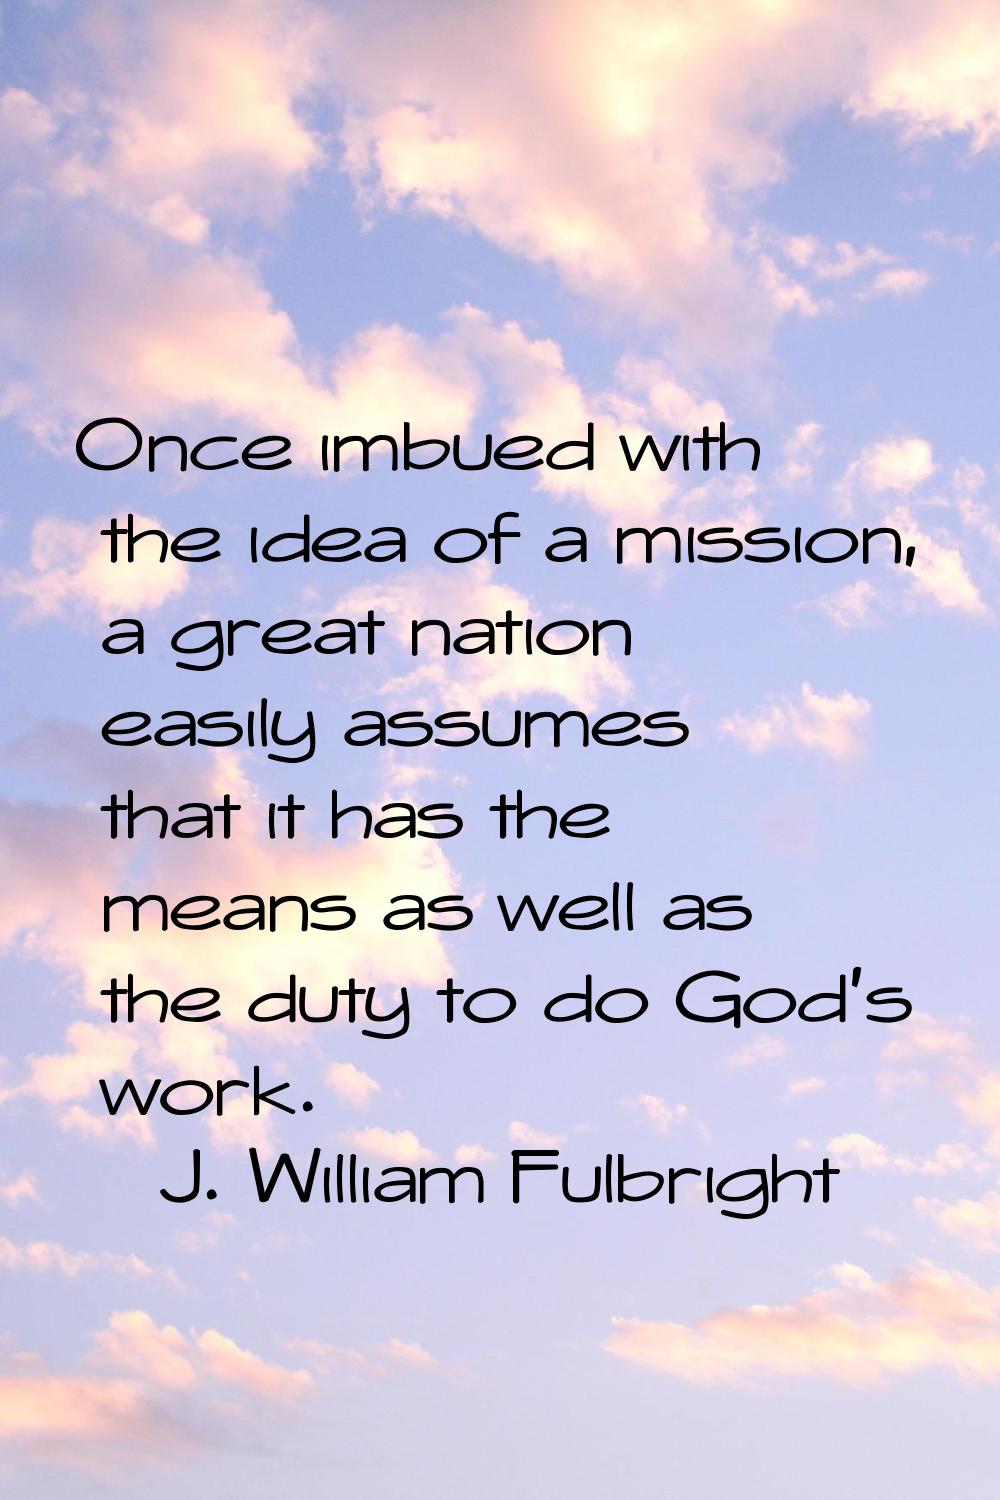 Once imbued with the idea of a mission, a great nation easily assumes that it has the means as well